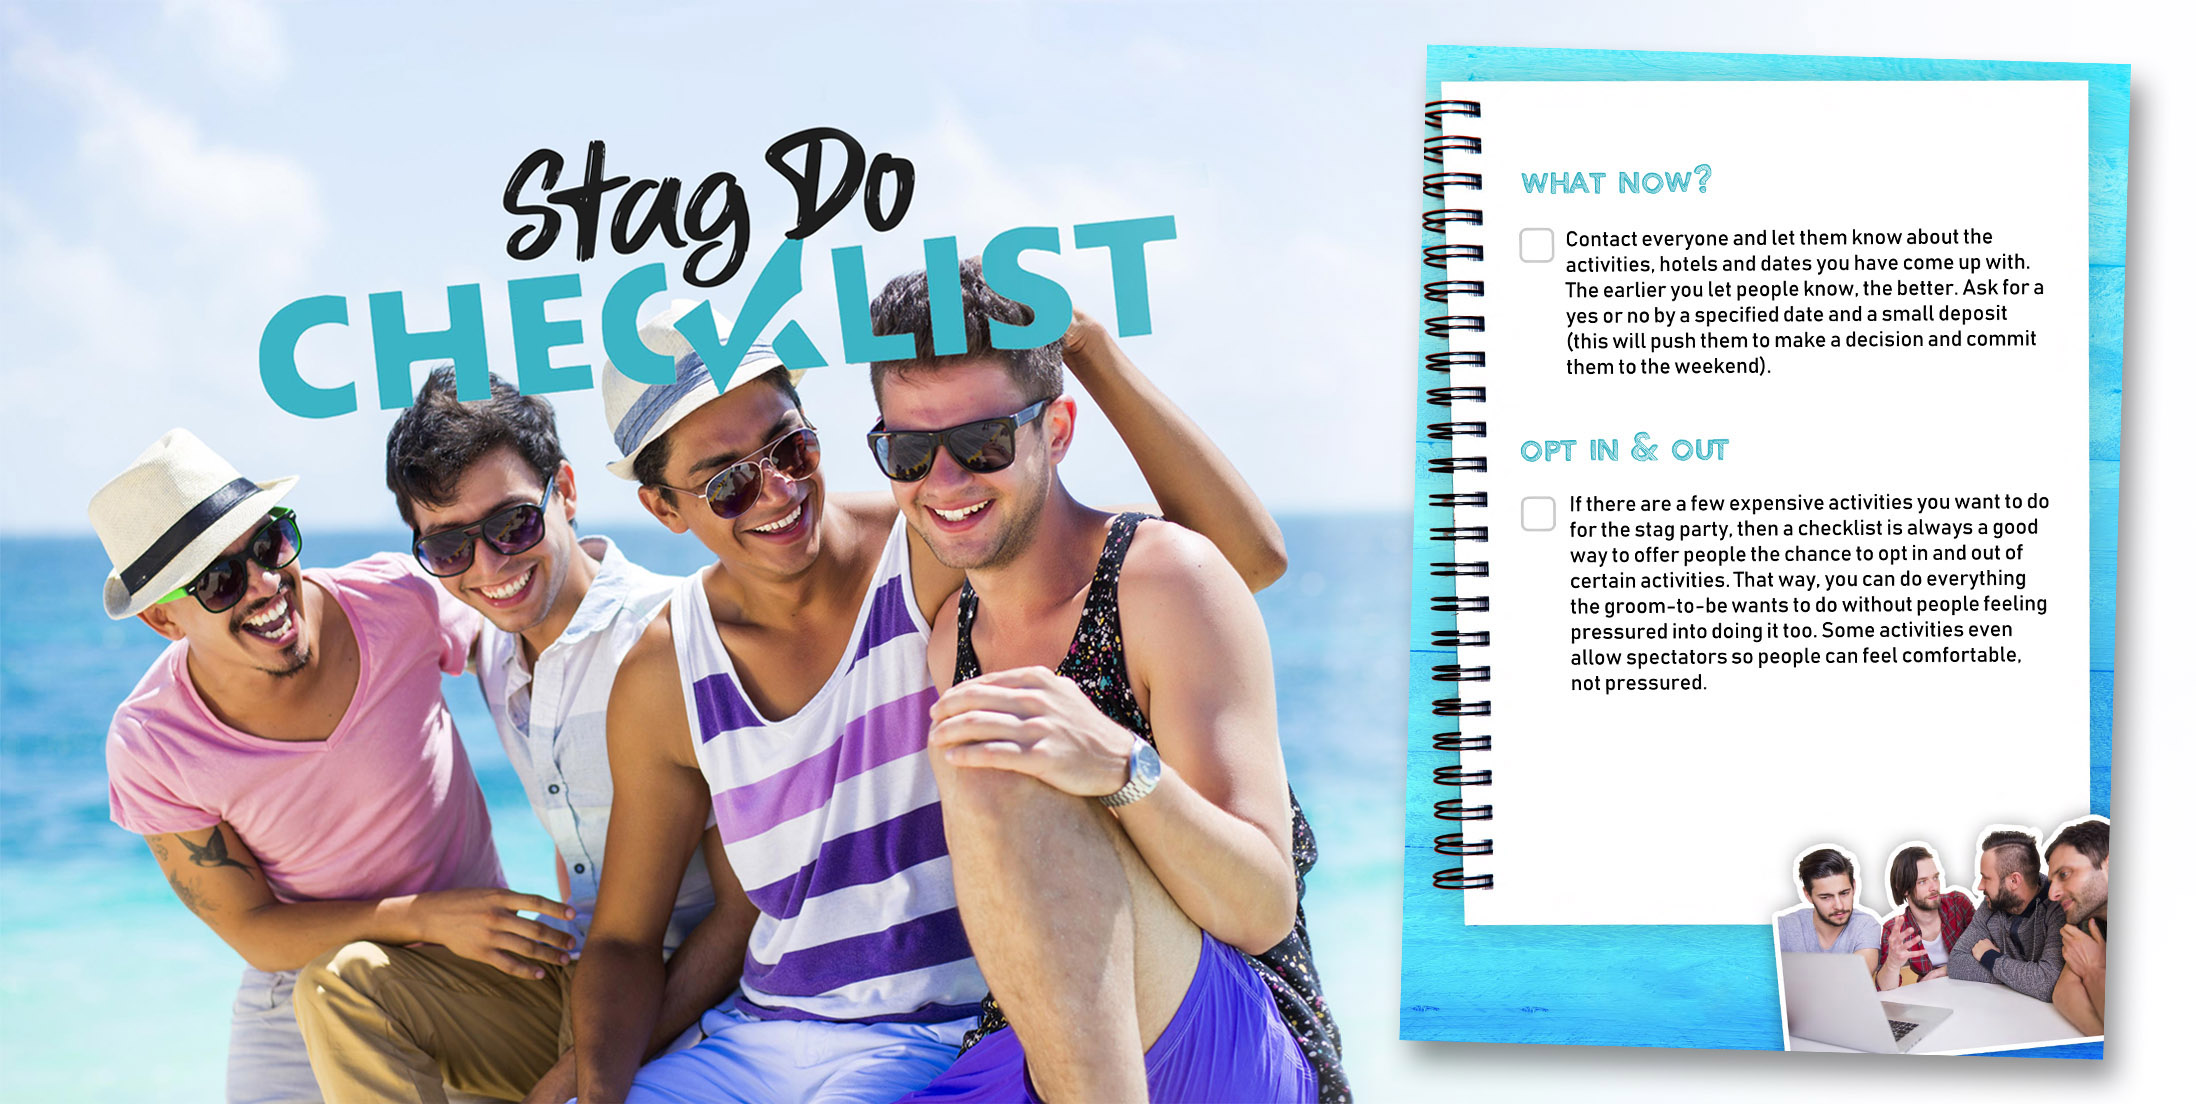 Freebies Page - Stag Do Checklist